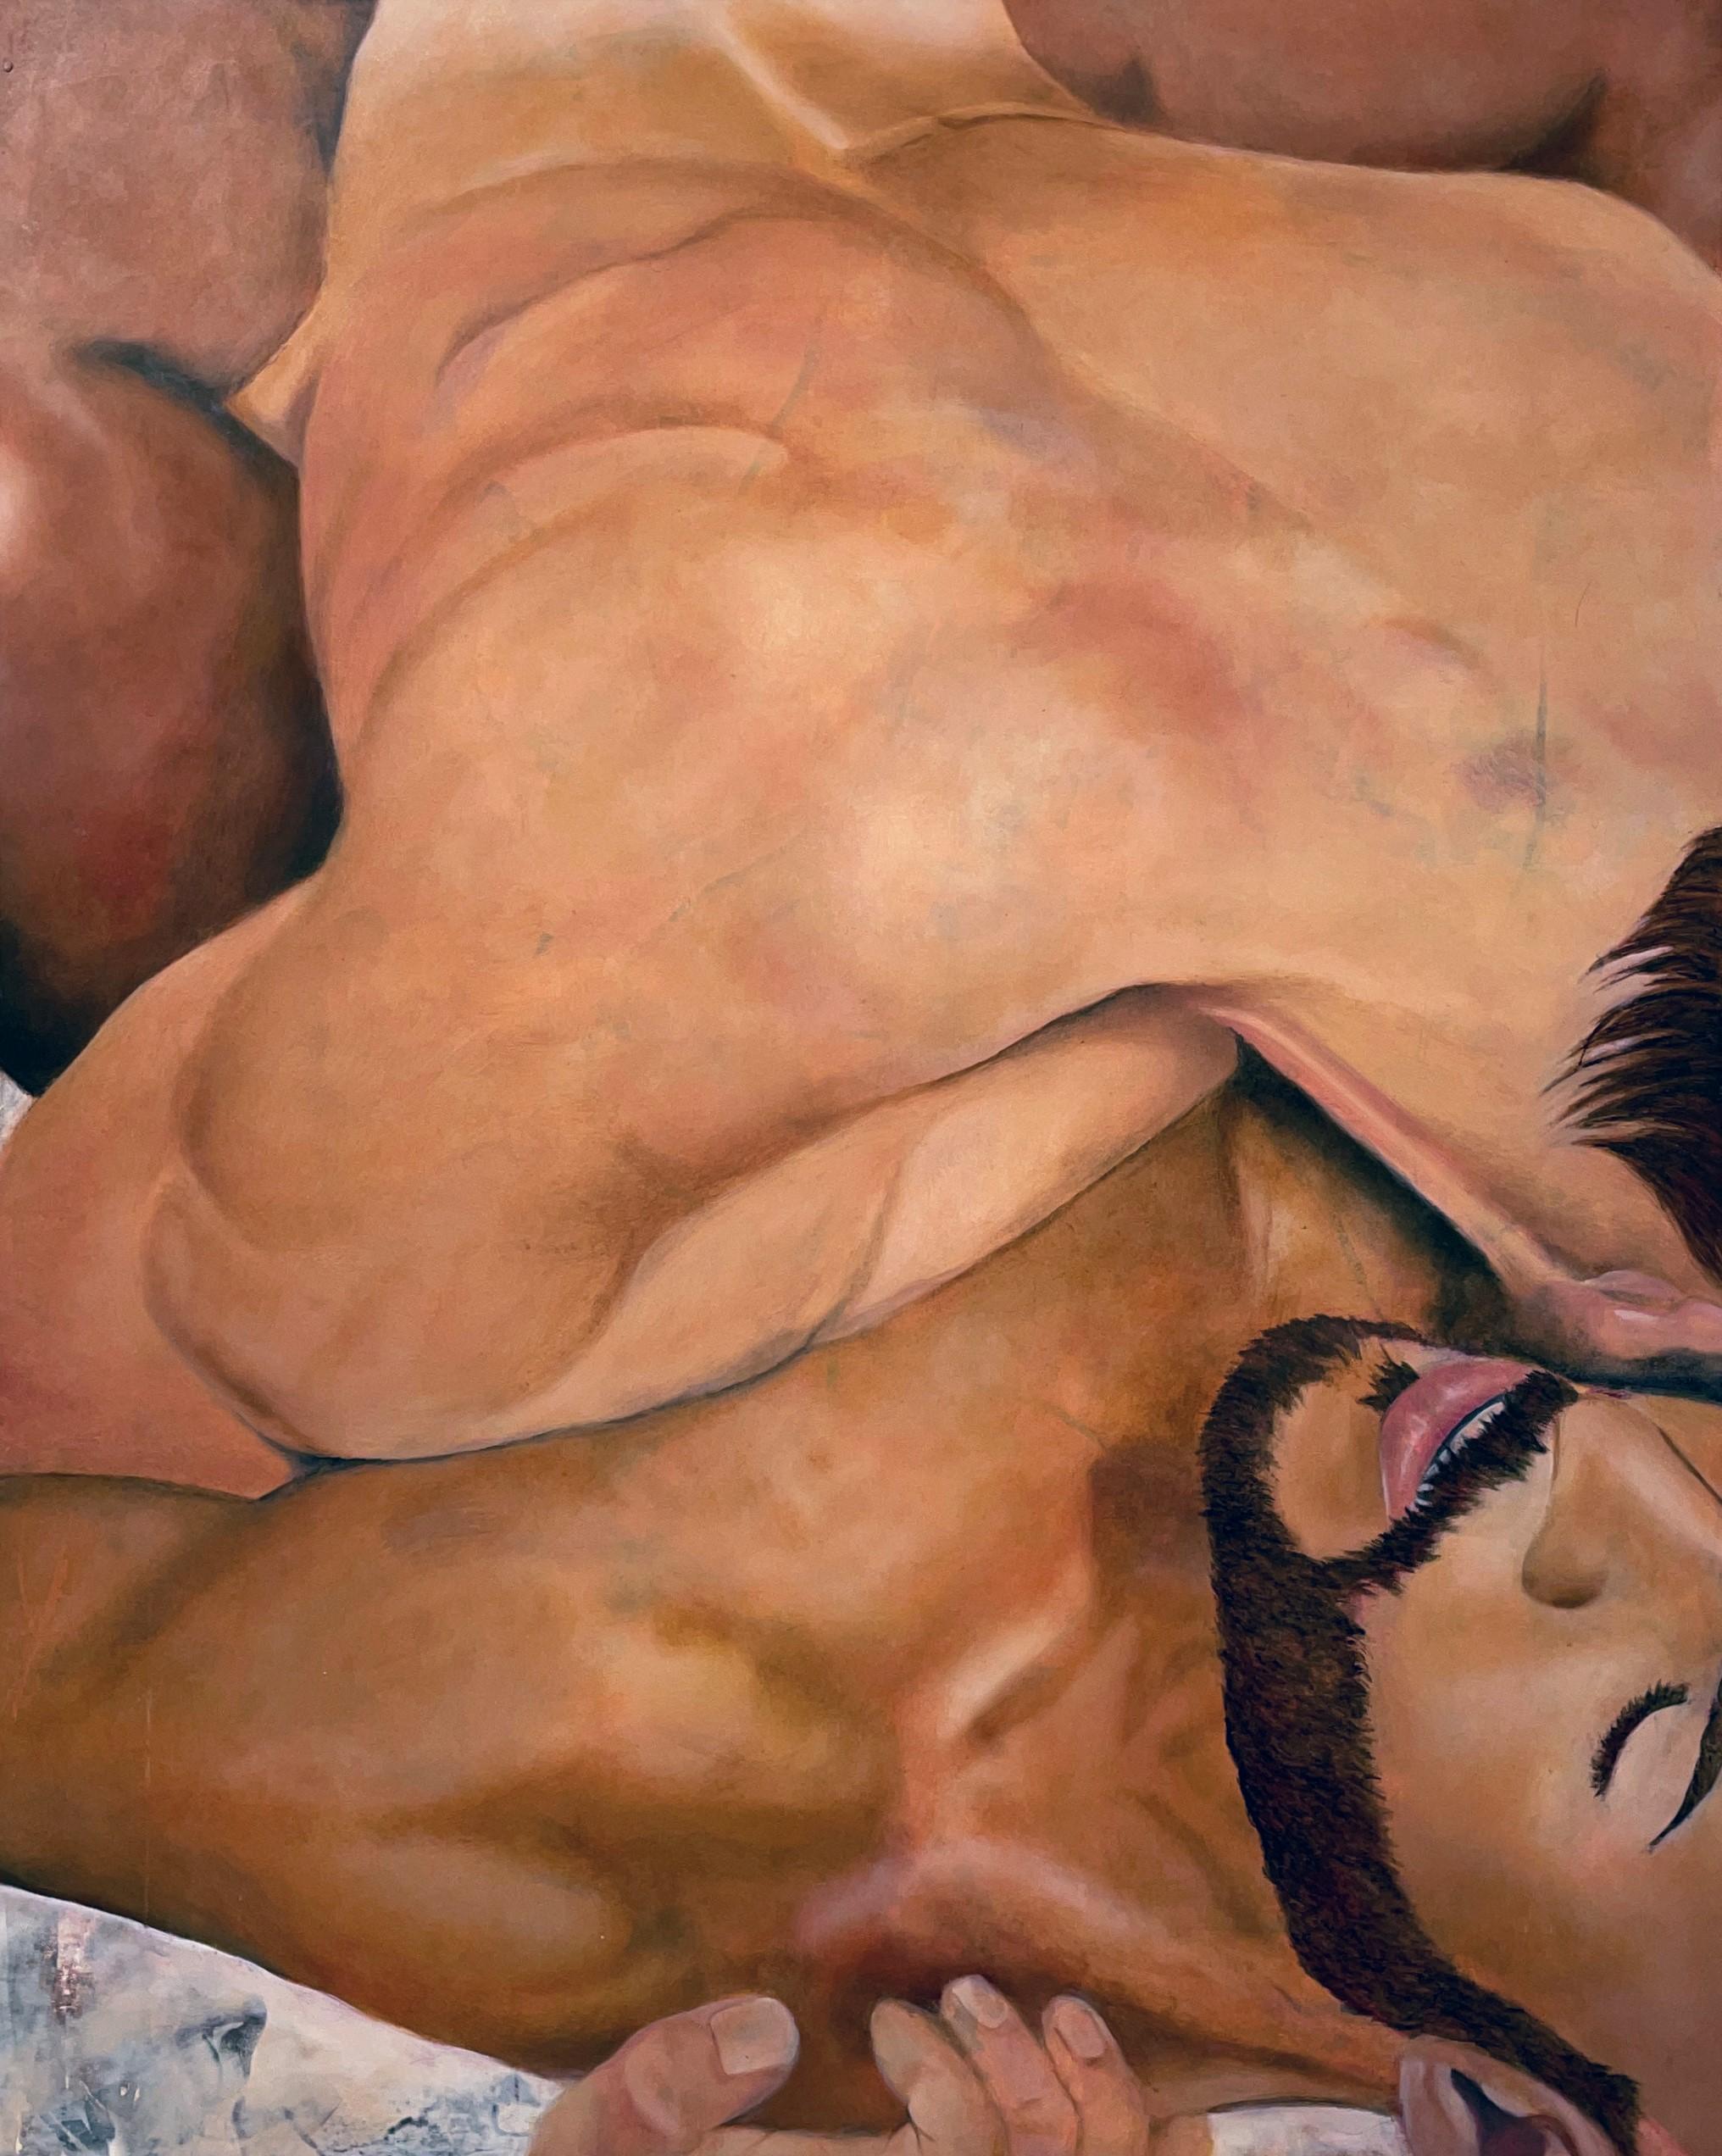 Rick Sindt Figurative Painting - Their Whole Private Selves - Two Nude Bodies Entwined, Original Oil on Panel